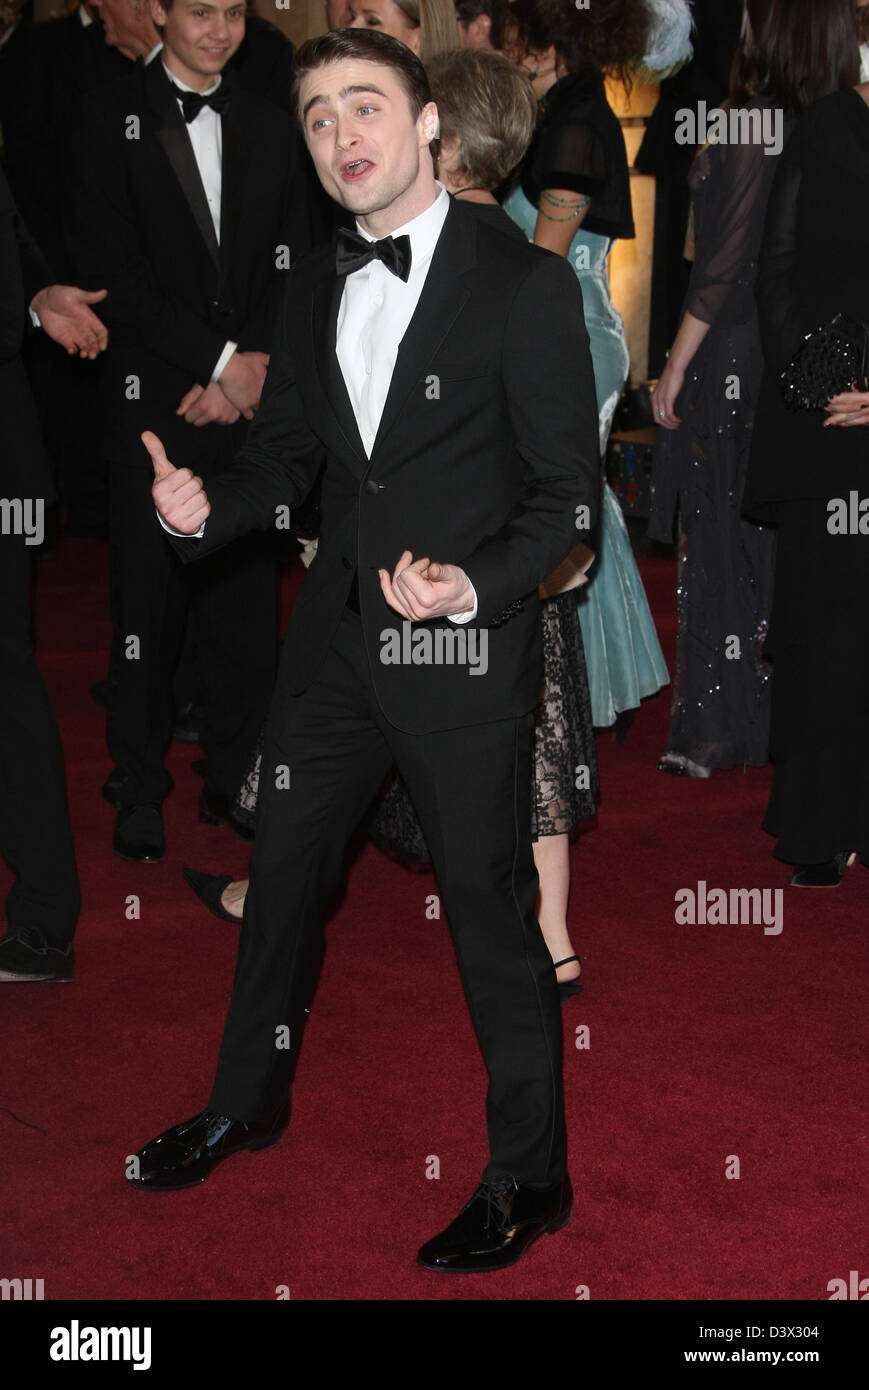 DANIEL RADCLIFFE 85TH ACADEMY AWARDS ARRIVALS DOLBY THEATRE LOS ANGELES CALIFORNIA USA 24 February 2013 Stock Photo